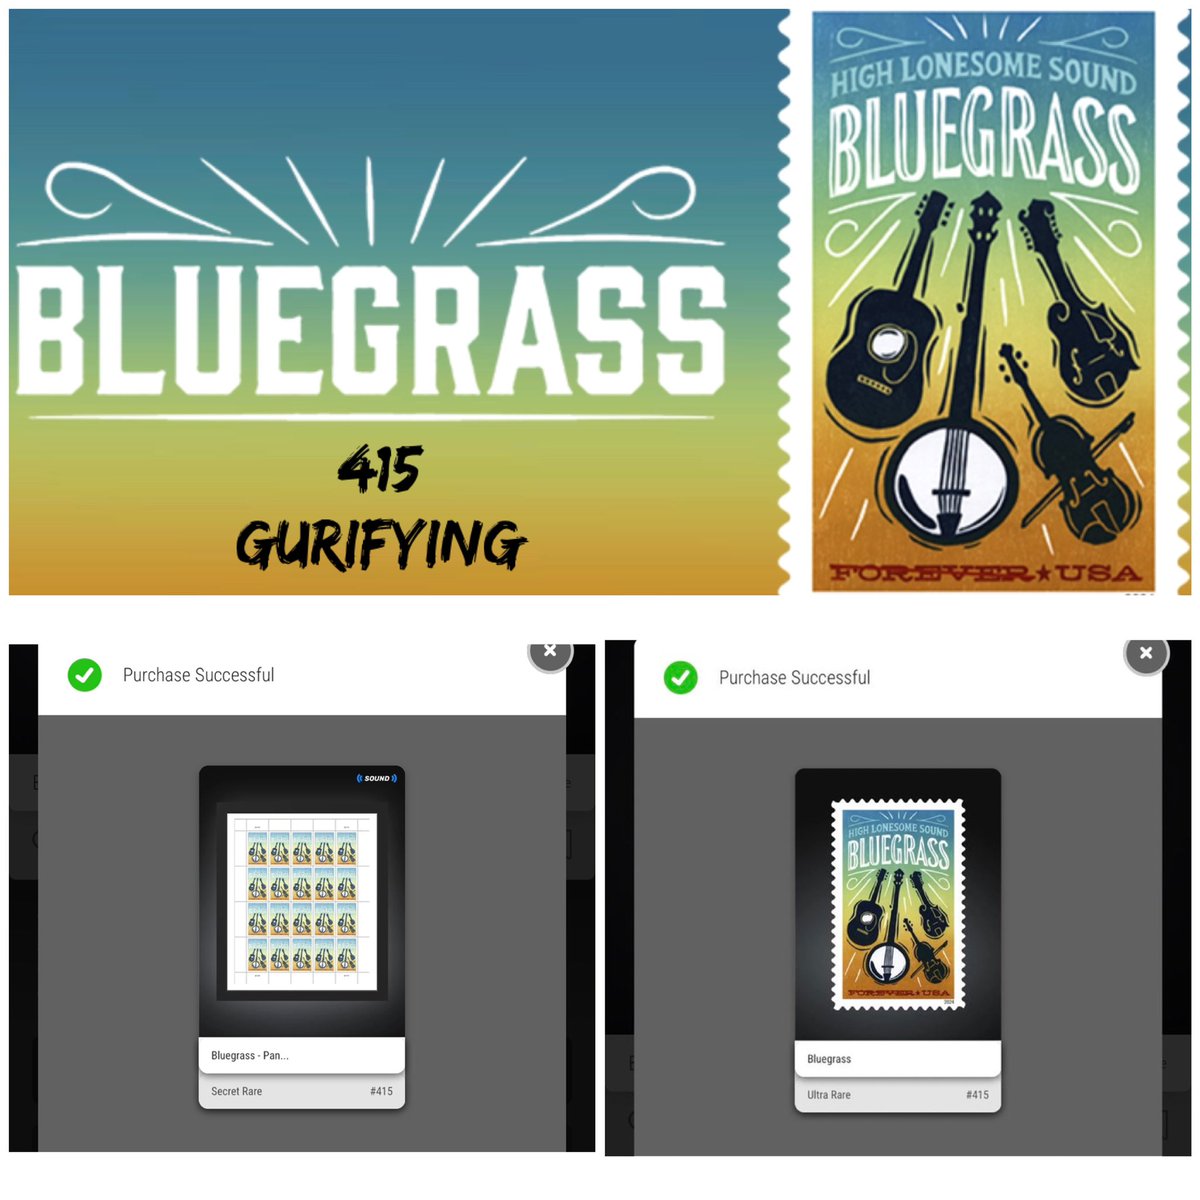 #415mint

Welcome stamp 29 to the 415 family.
Collectible 115

Blue Grass SR, completes the set. 

Thanks @olezha199  selling me this stamp to help me with my collection.  

I collect art, stamps and cars for the mint 415.   

#vevefam
#digitalcollectibles